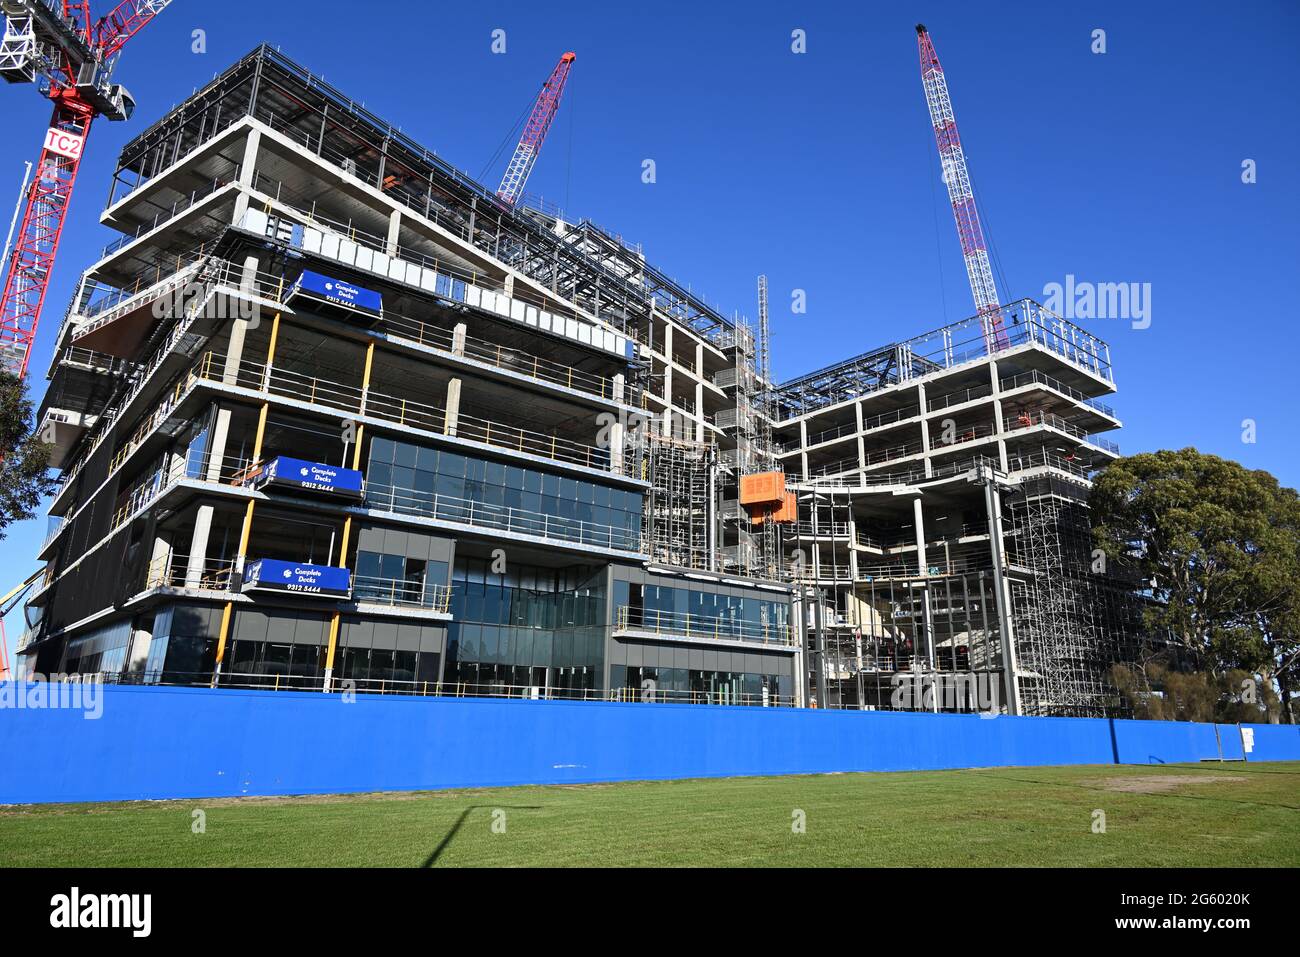 West side of the construction site of the Victorian Heart Hospital, also known as Monash Heart, located on Blackburn Rd next to Monash University Stock Photo